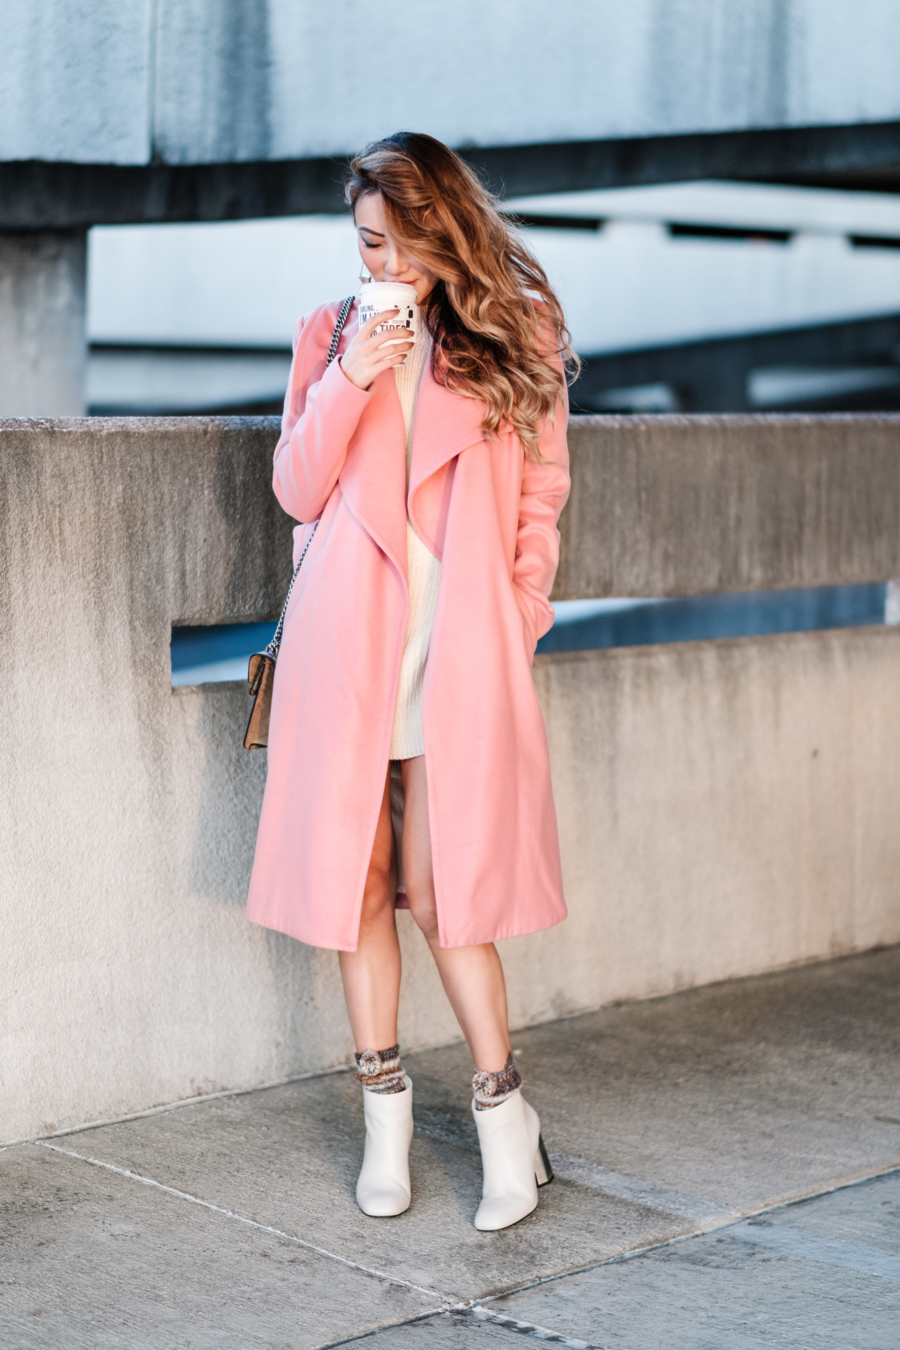 How To Style A Pink Coat // NotJessFashion.com